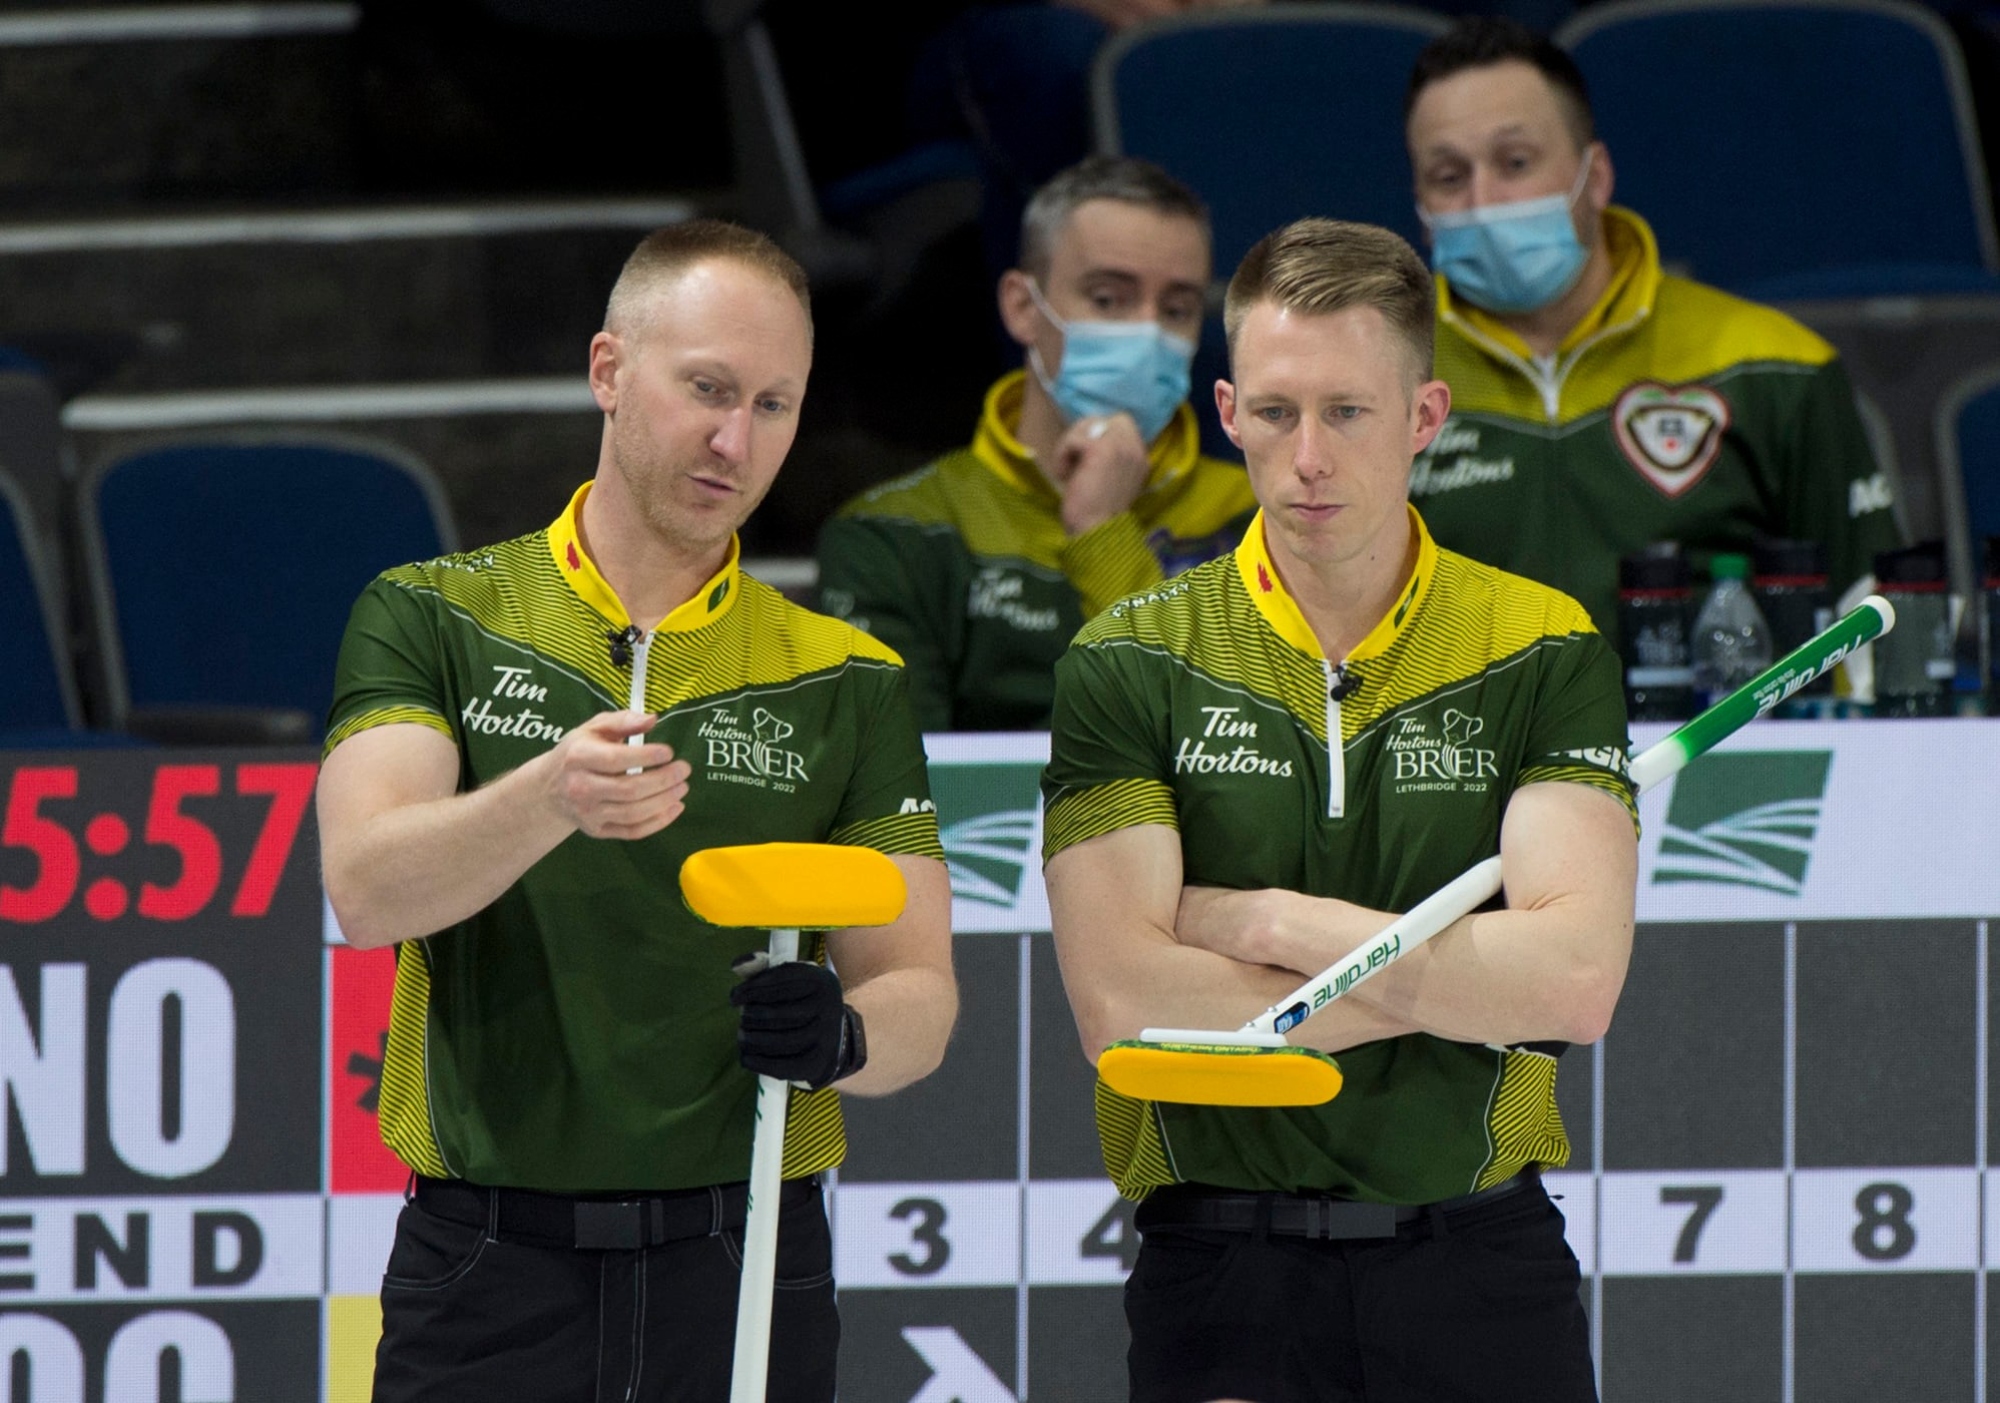 Team Jacobs rebounds to improve to 3-1 at Brier - Sault Ste. Marie News